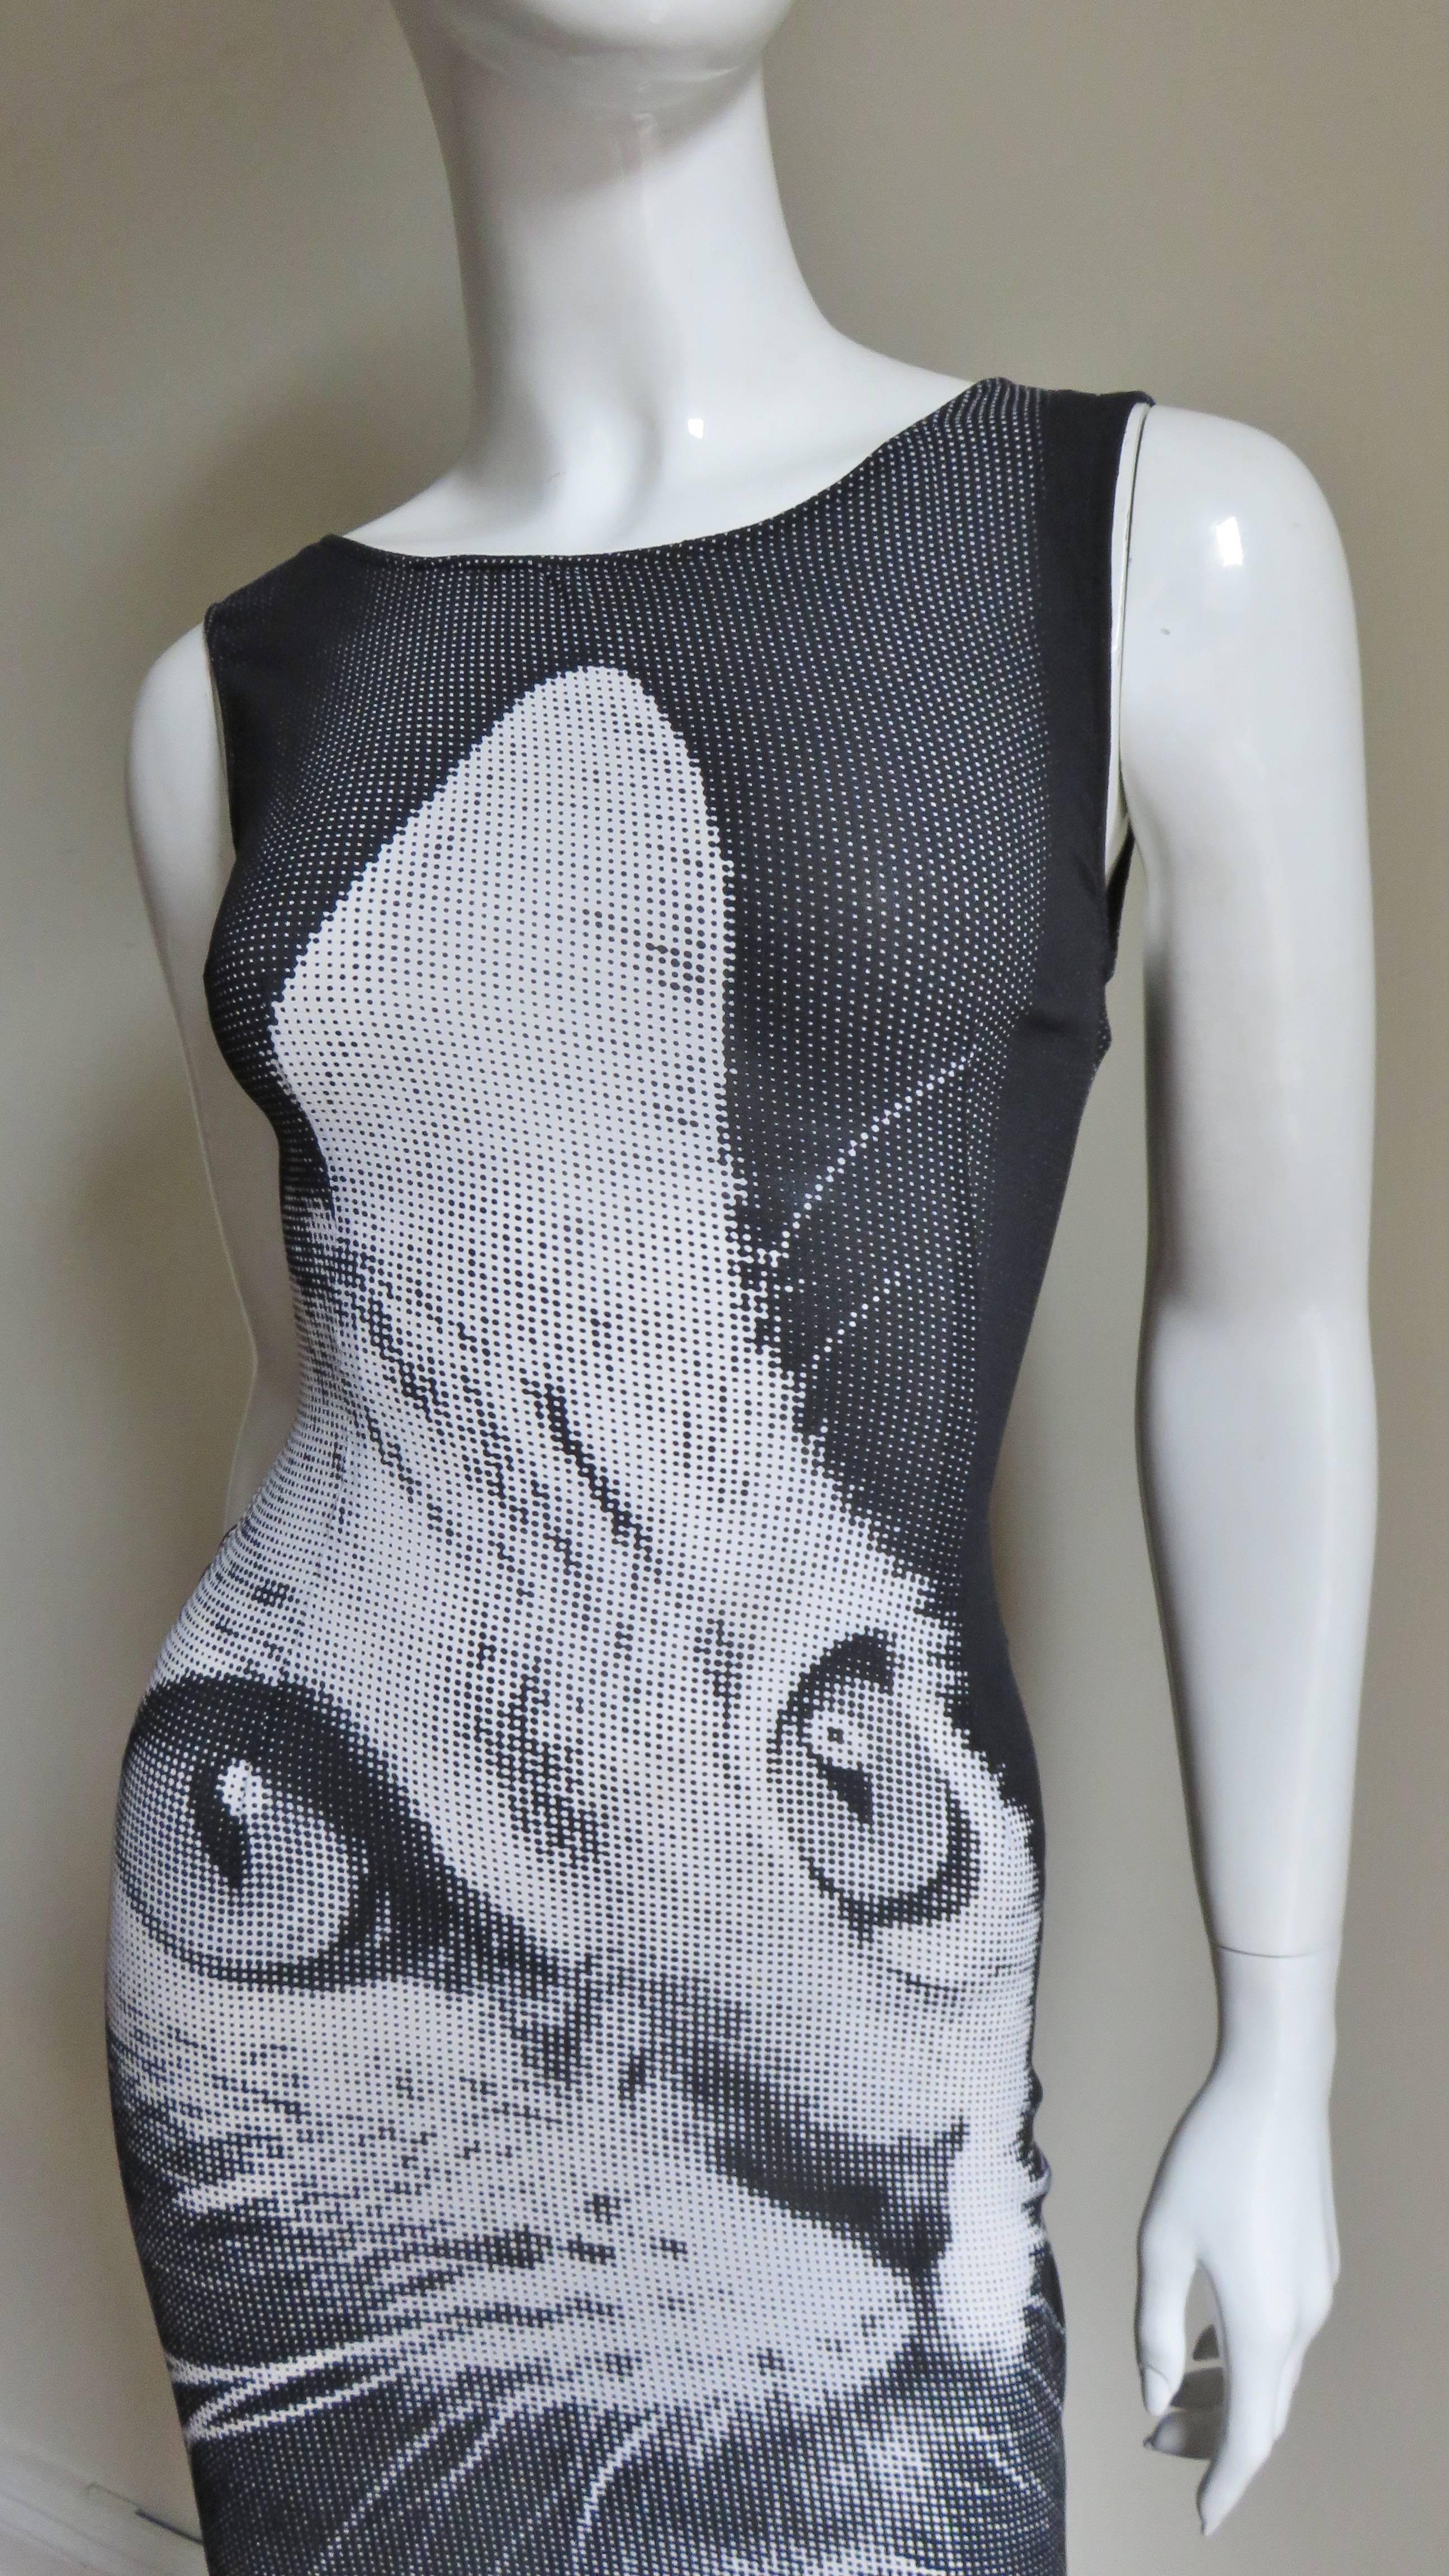 A fabulous light weight stretch silk dress in greys, black and white with a pixelated cat image on the front.  It is a sleeveless fitted dress with a rounded neckline and a V back.  I has a center back zipper and is unlined.
Excellent condition. 